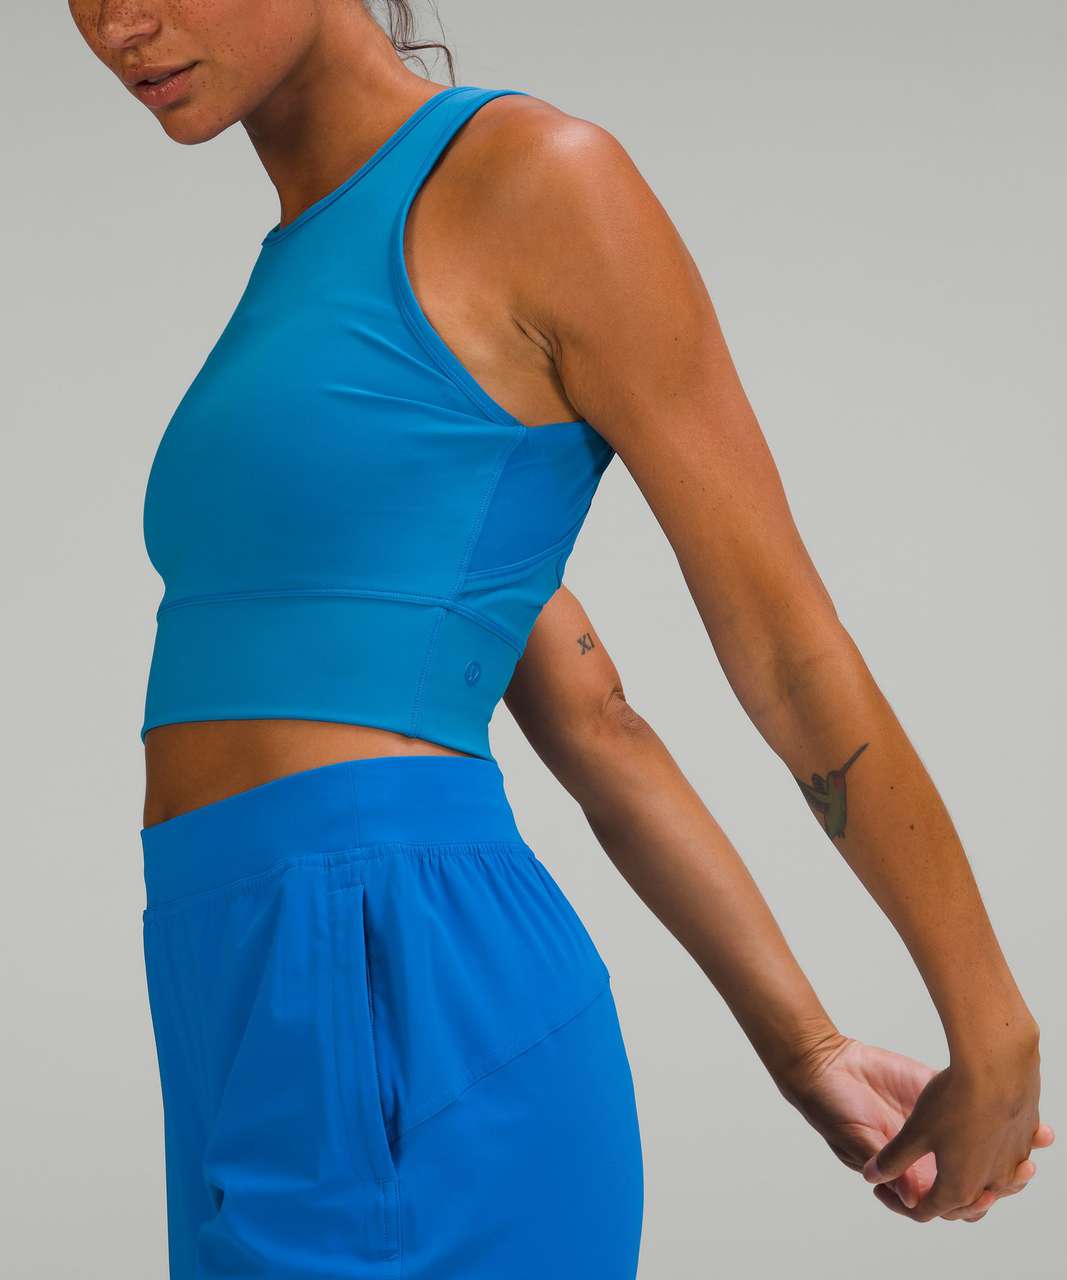 Lululemon Mesh Tank Top with a Built-in Sports Bra